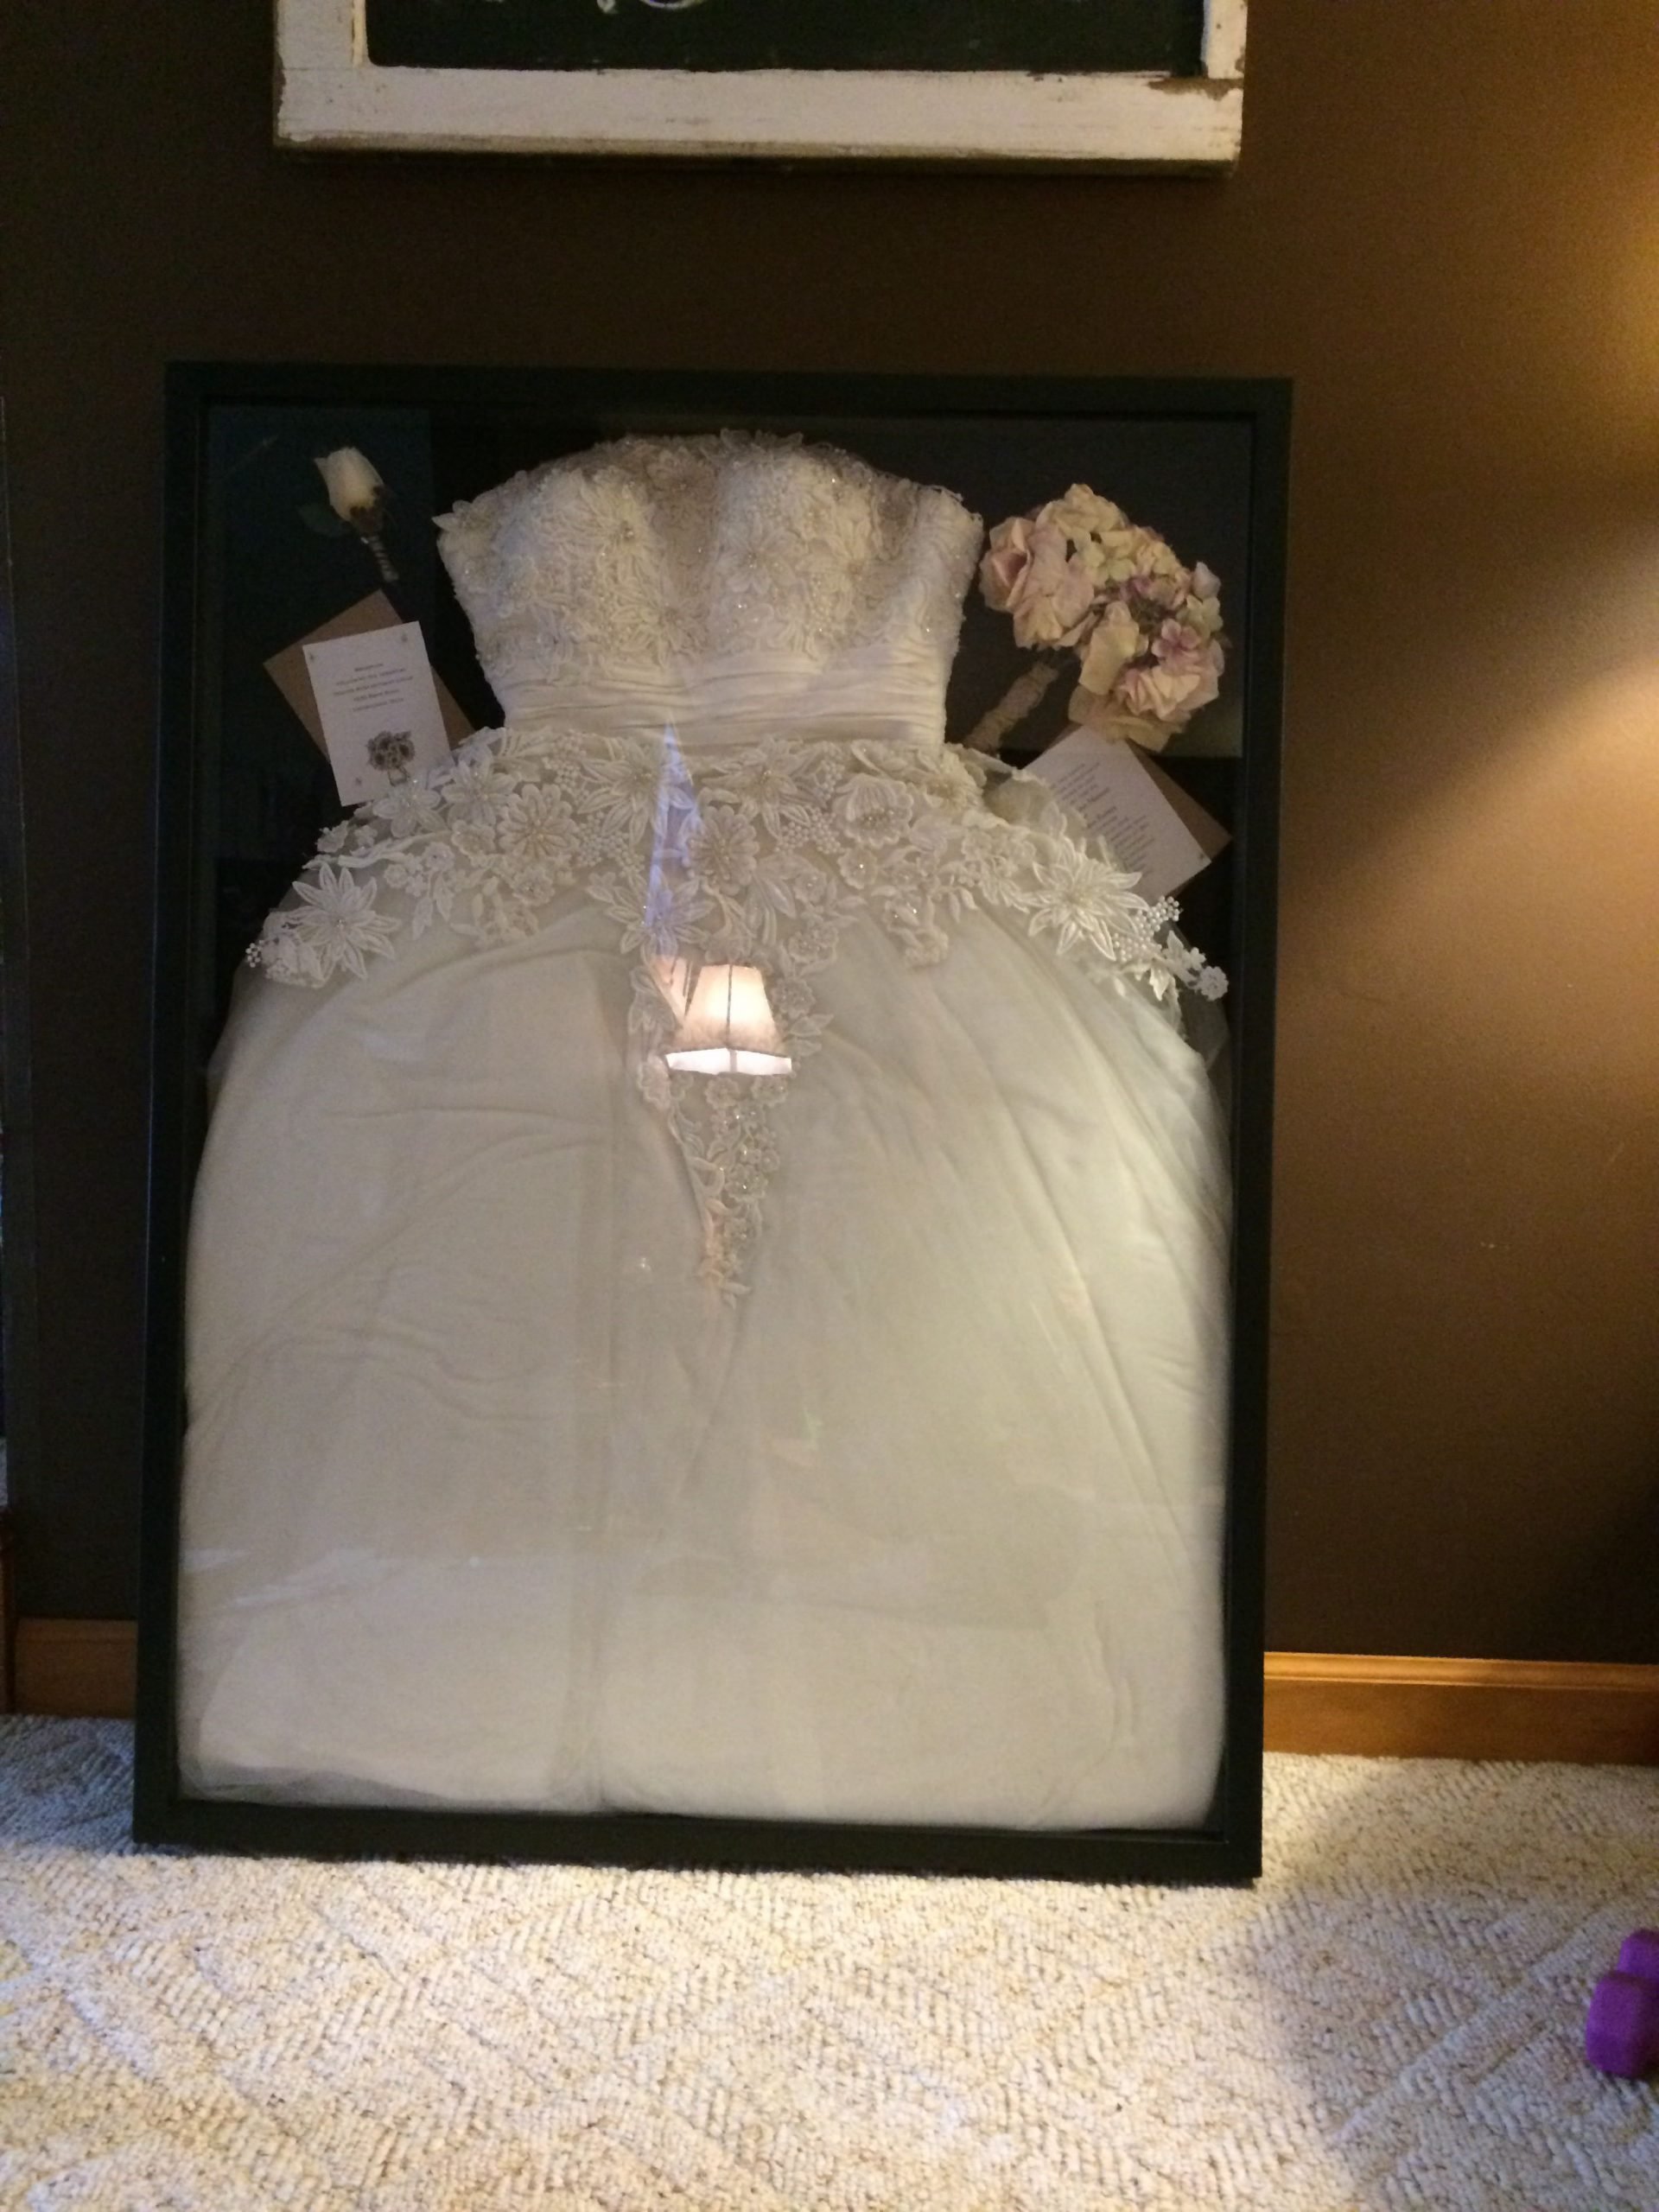 Wedding dress in a shadow box get the largest one from ...